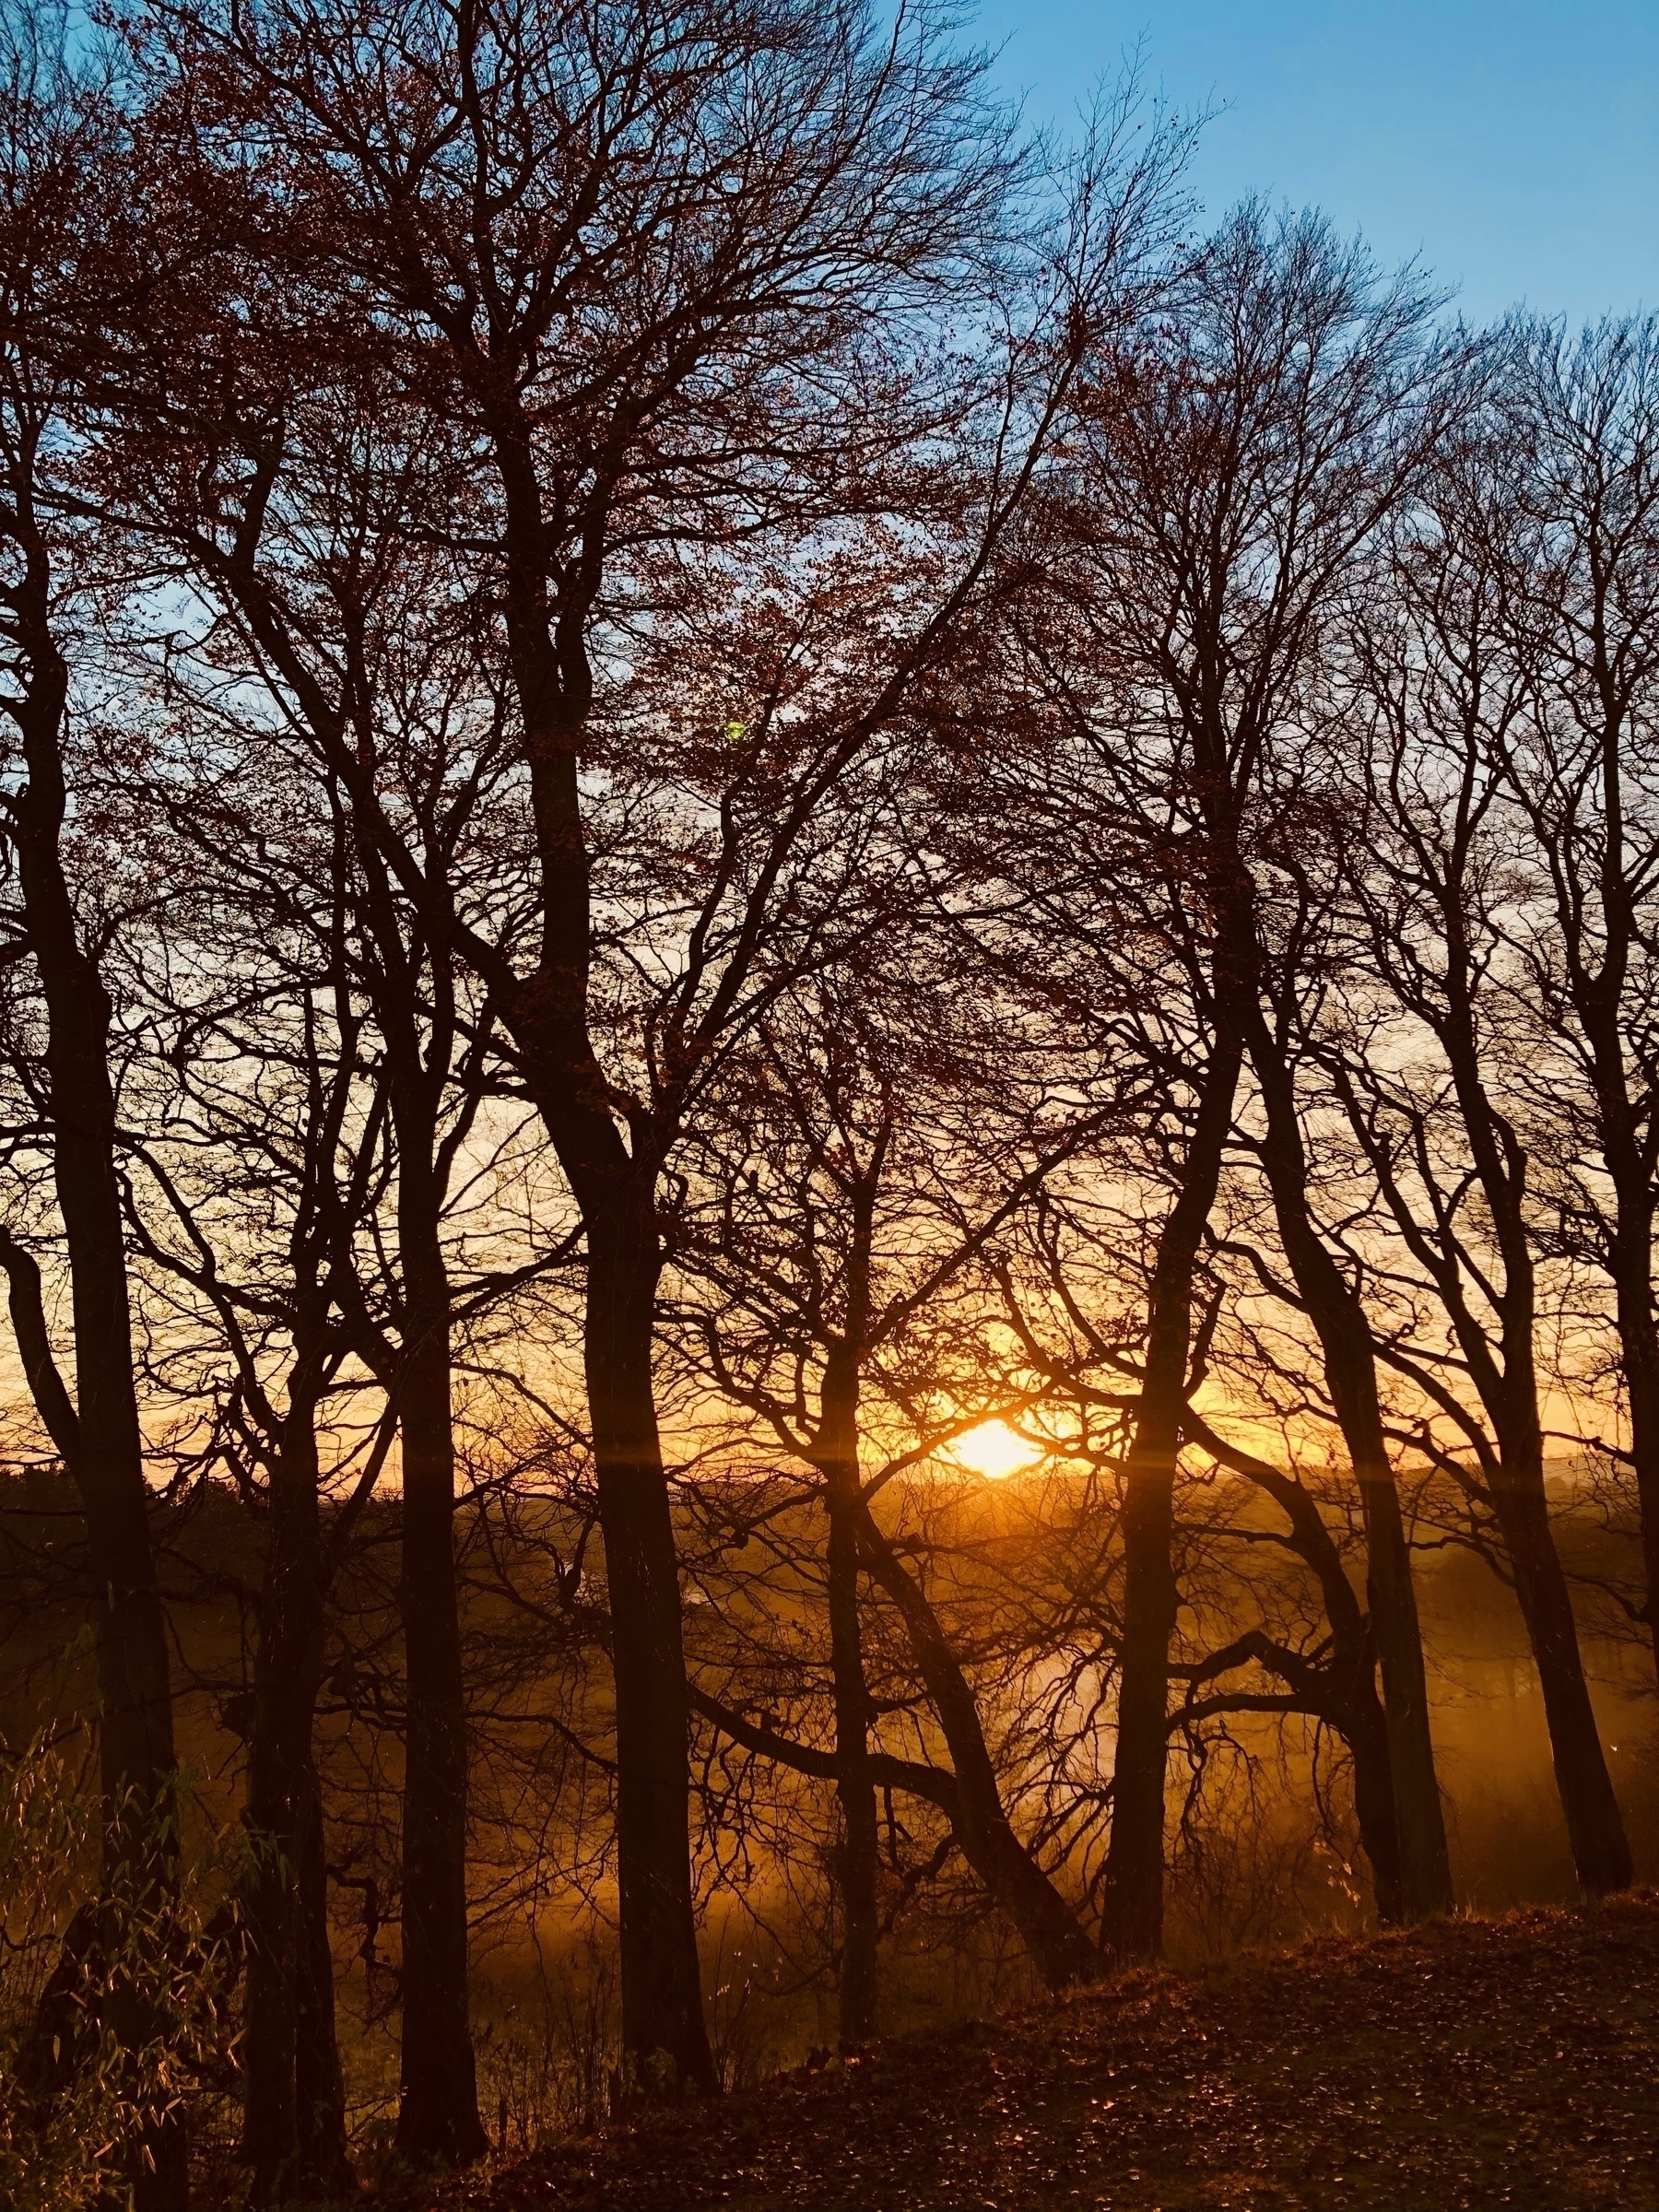 Bare winter trees with sun setting behind